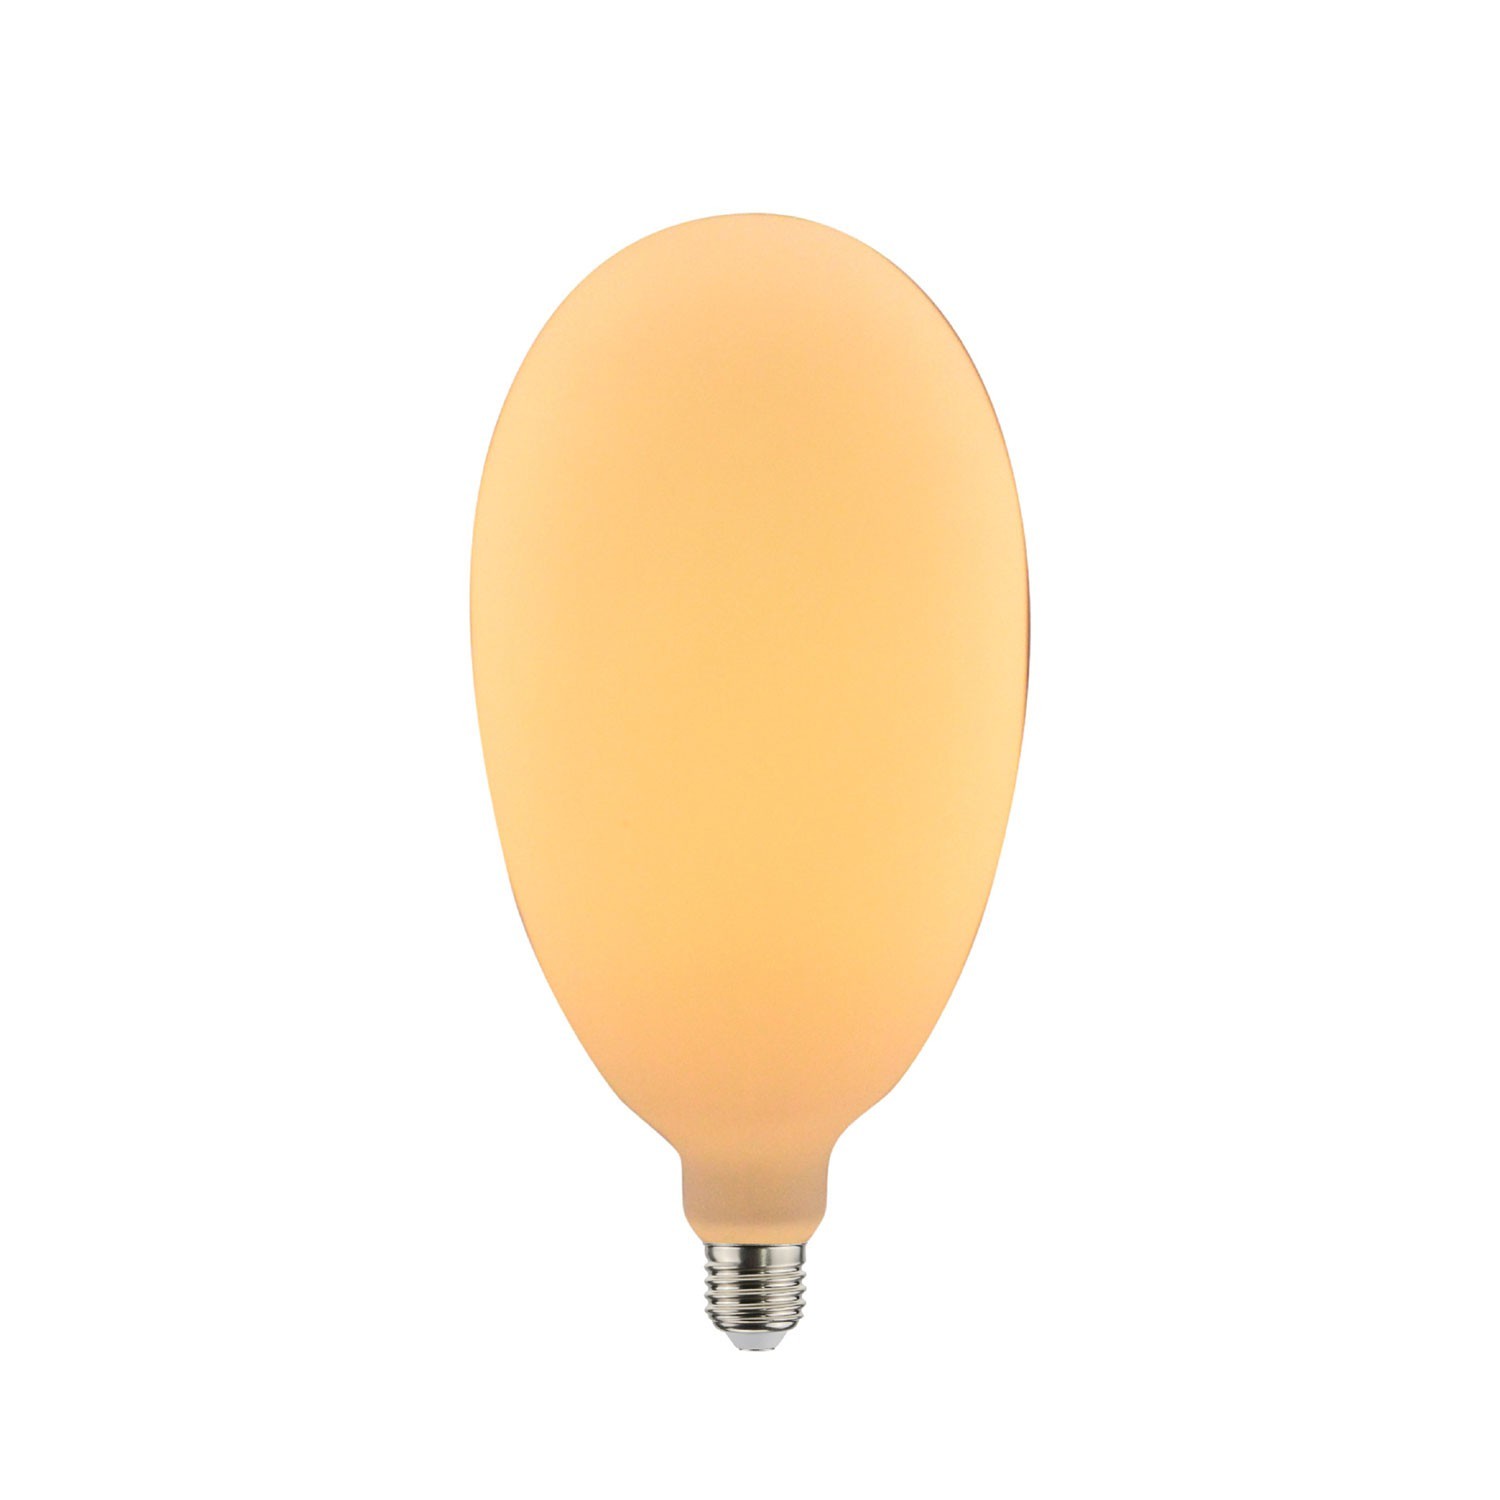 Ampoule LED Porcelaine Mammamia XL 13W E27 Dimmable 2700K